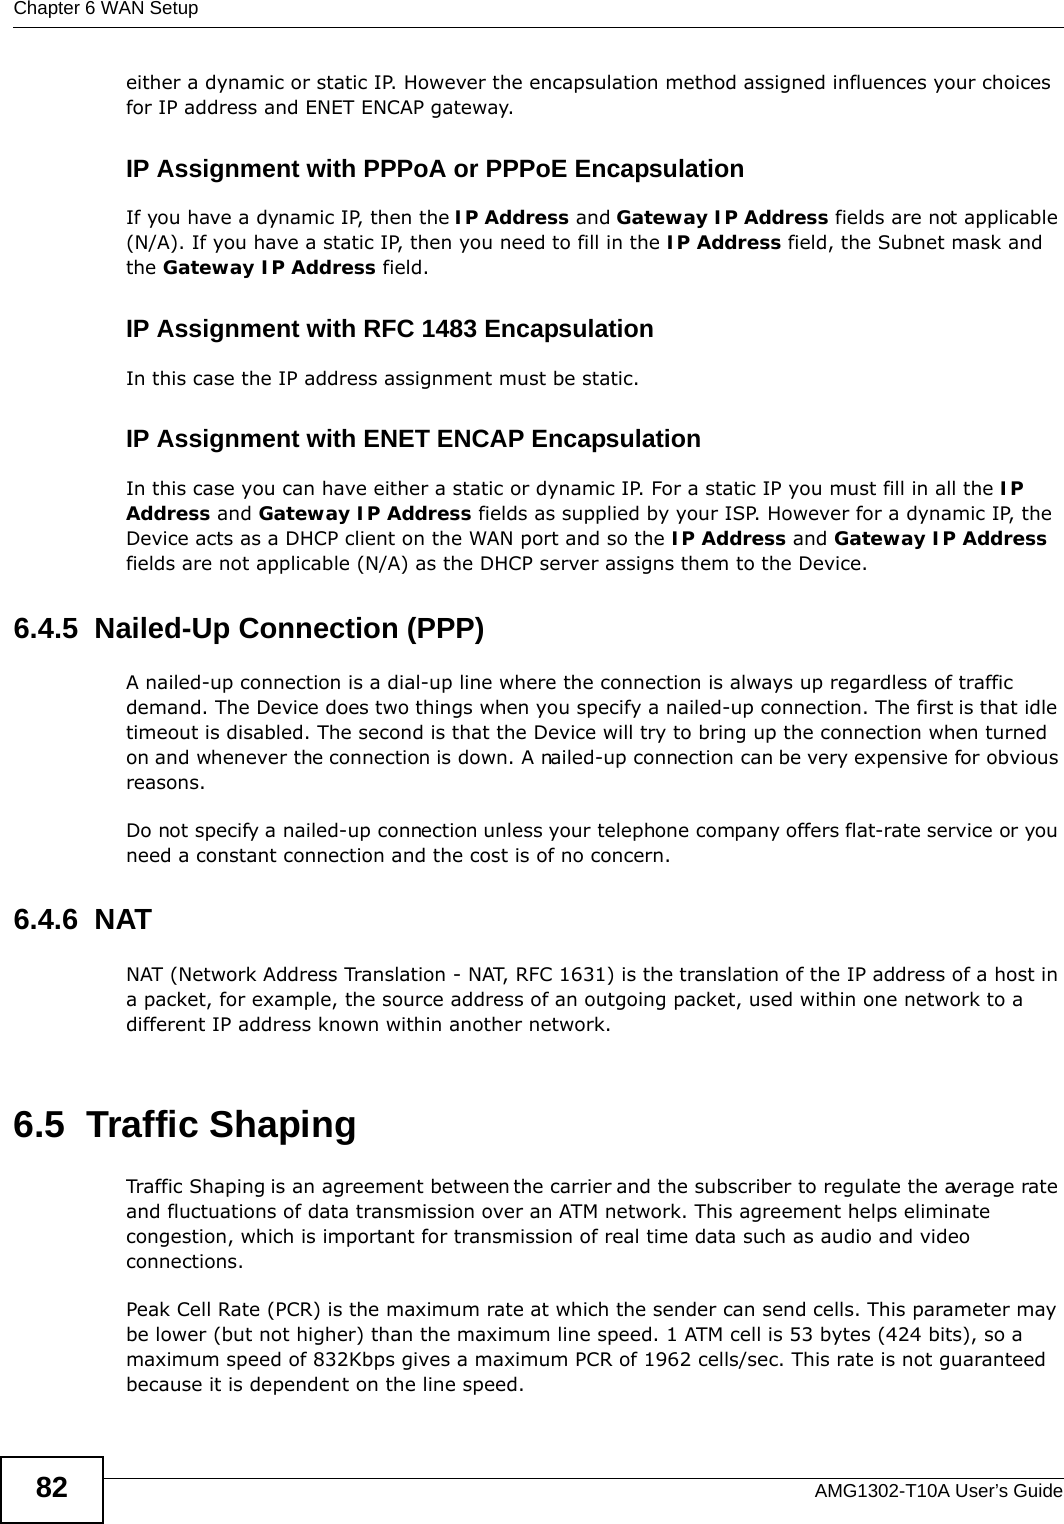 Chapter 6 WAN SetupAMG1302-T10A User’s Guide82either a dynamic or static IP. However the encapsulation method assigned influences your choices for IP address and ENET ENCAP gateway.IP Assignment with PPPoA or PPPoE EncapsulationIf you have a dynamic IP, then the IP Address and Gateway IP Address fields are not applicable (N/A). If you have a static IP, then you need to fill in the IP Address field, the Subnet mask and the Gateway IP Address field.IP Assignment with RFC 1483 EncapsulationIn this case the IP address assignment must be static.IP Assignment with ENET ENCAP EncapsulationIn this case you can have either a static or dynamic IP. For a static IP you must fill in all the IP Address and Gateway IP Address fields as supplied by your ISP. However for a dynamic IP, the Device acts as a DHCP client on the WAN port and so the IP Address and Gateway IP Address fields are not applicable (N/A) as the DHCP server assigns them to the Device.6.4.5  Nailed-Up Connection (PPP)A nailed-up connection is a dial-up line where the connection is always up regardless of traffic demand. The Device does two things when you specify a nailed-up connection. The first is that idle timeout is disabled. The second is that the Device will try to bring up the connection when turned on and whenever the connection is down. A nailed-up connection can be very expensive for obvious reasons. Do not specify a nailed-up connection unless your telephone company offers flat-rate service or you need a constant connection and the cost is of no concern.6.4.6  NATNAT (Network Address Translation - NAT, RFC 1631) is the translation of the IP address of a host in a packet, for example, the source address of an outgoing packet, used within one network to a different IP address known within another network.6.5  Traffic ShapingTraffic Shaping is an agreement between the carrier and the subscriber to regulate the average rate and fluctuations of data transmission over an ATM network. This agreement helps eliminate congestion, which is important for transmission of real time data such as audio and video connections.Peak Cell Rate (PCR) is the maximum rate at which the sender can send cells. This parameter may be lower (but not higher) than the maximum line speed. 1 ATM cell is 53 bytes (424 bits), so a maximum speed of 832Kbps gives a maximum PCR of 1962 cells/sec. This rate is not guaranteed because it is dependent on the line speed.